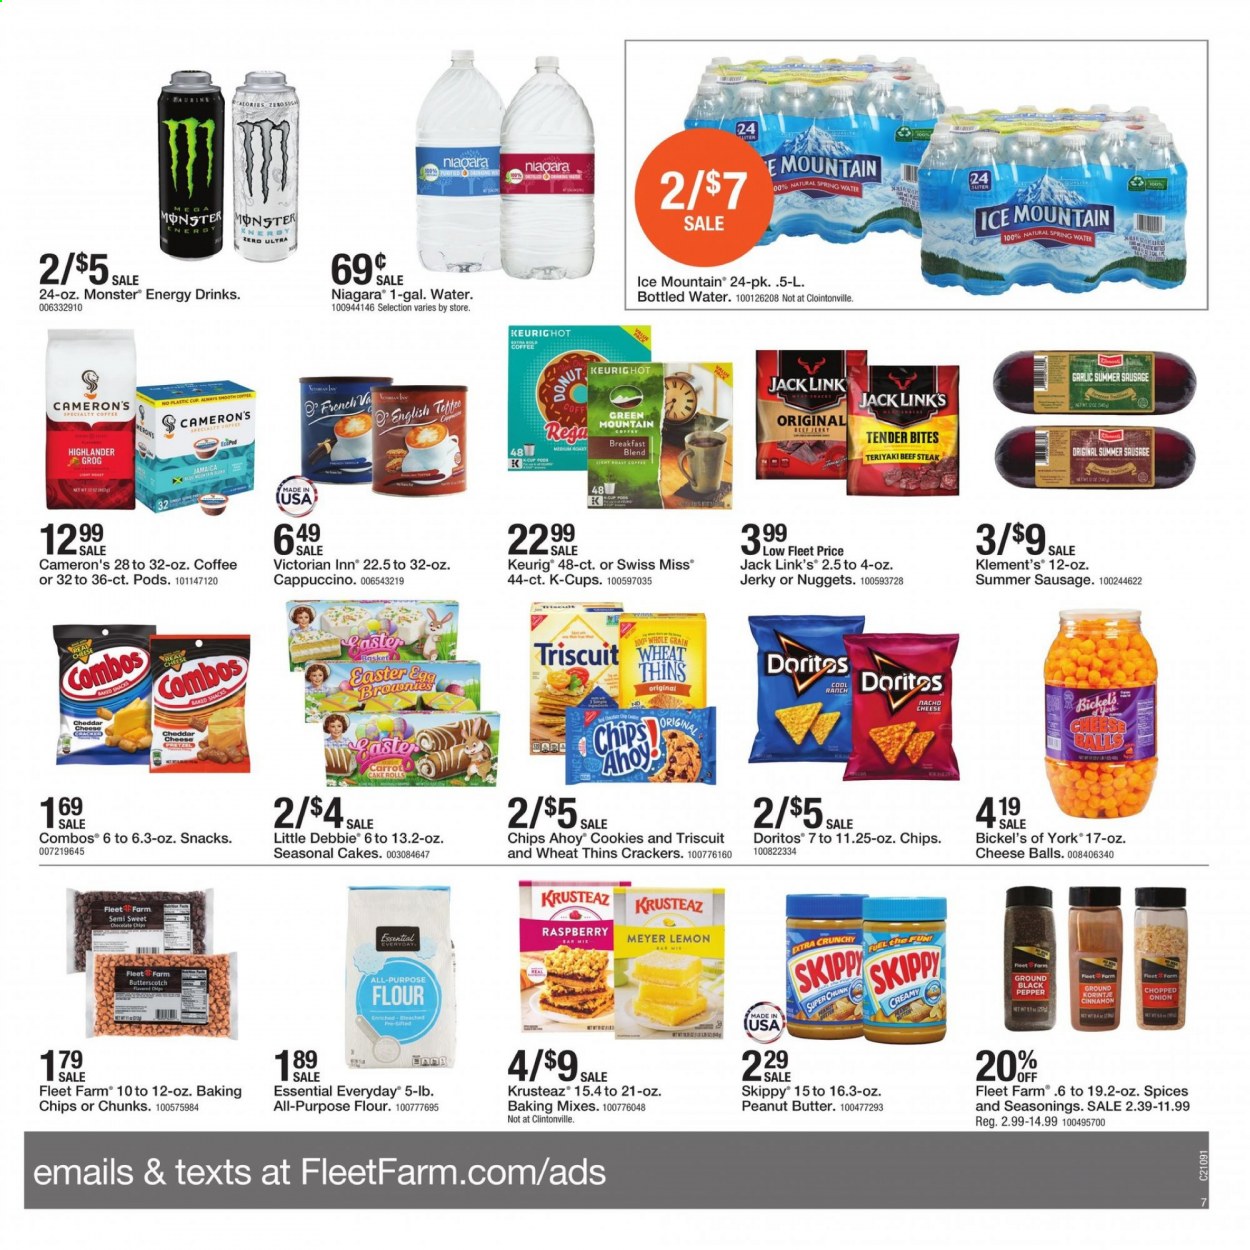 thumbnail - Fleet Farm Flyer - 02/26/2021 - 03/06/2021 - Sales products - pretzels, cake, brownies, butterscotch, cookies, crackers, Swiss Miss, Doritos, snack, Thins, Jack Link's, flour, baking chips, garlic, cinnamon, peanut butter, energy drink, Monster, Monster Energy, spring water, bottled water, Ice Mountain, cappuccino, coffee, coffee capsules, K-Cups, Keurig, breakfast blend, Green Mountain, basket. Page 7.